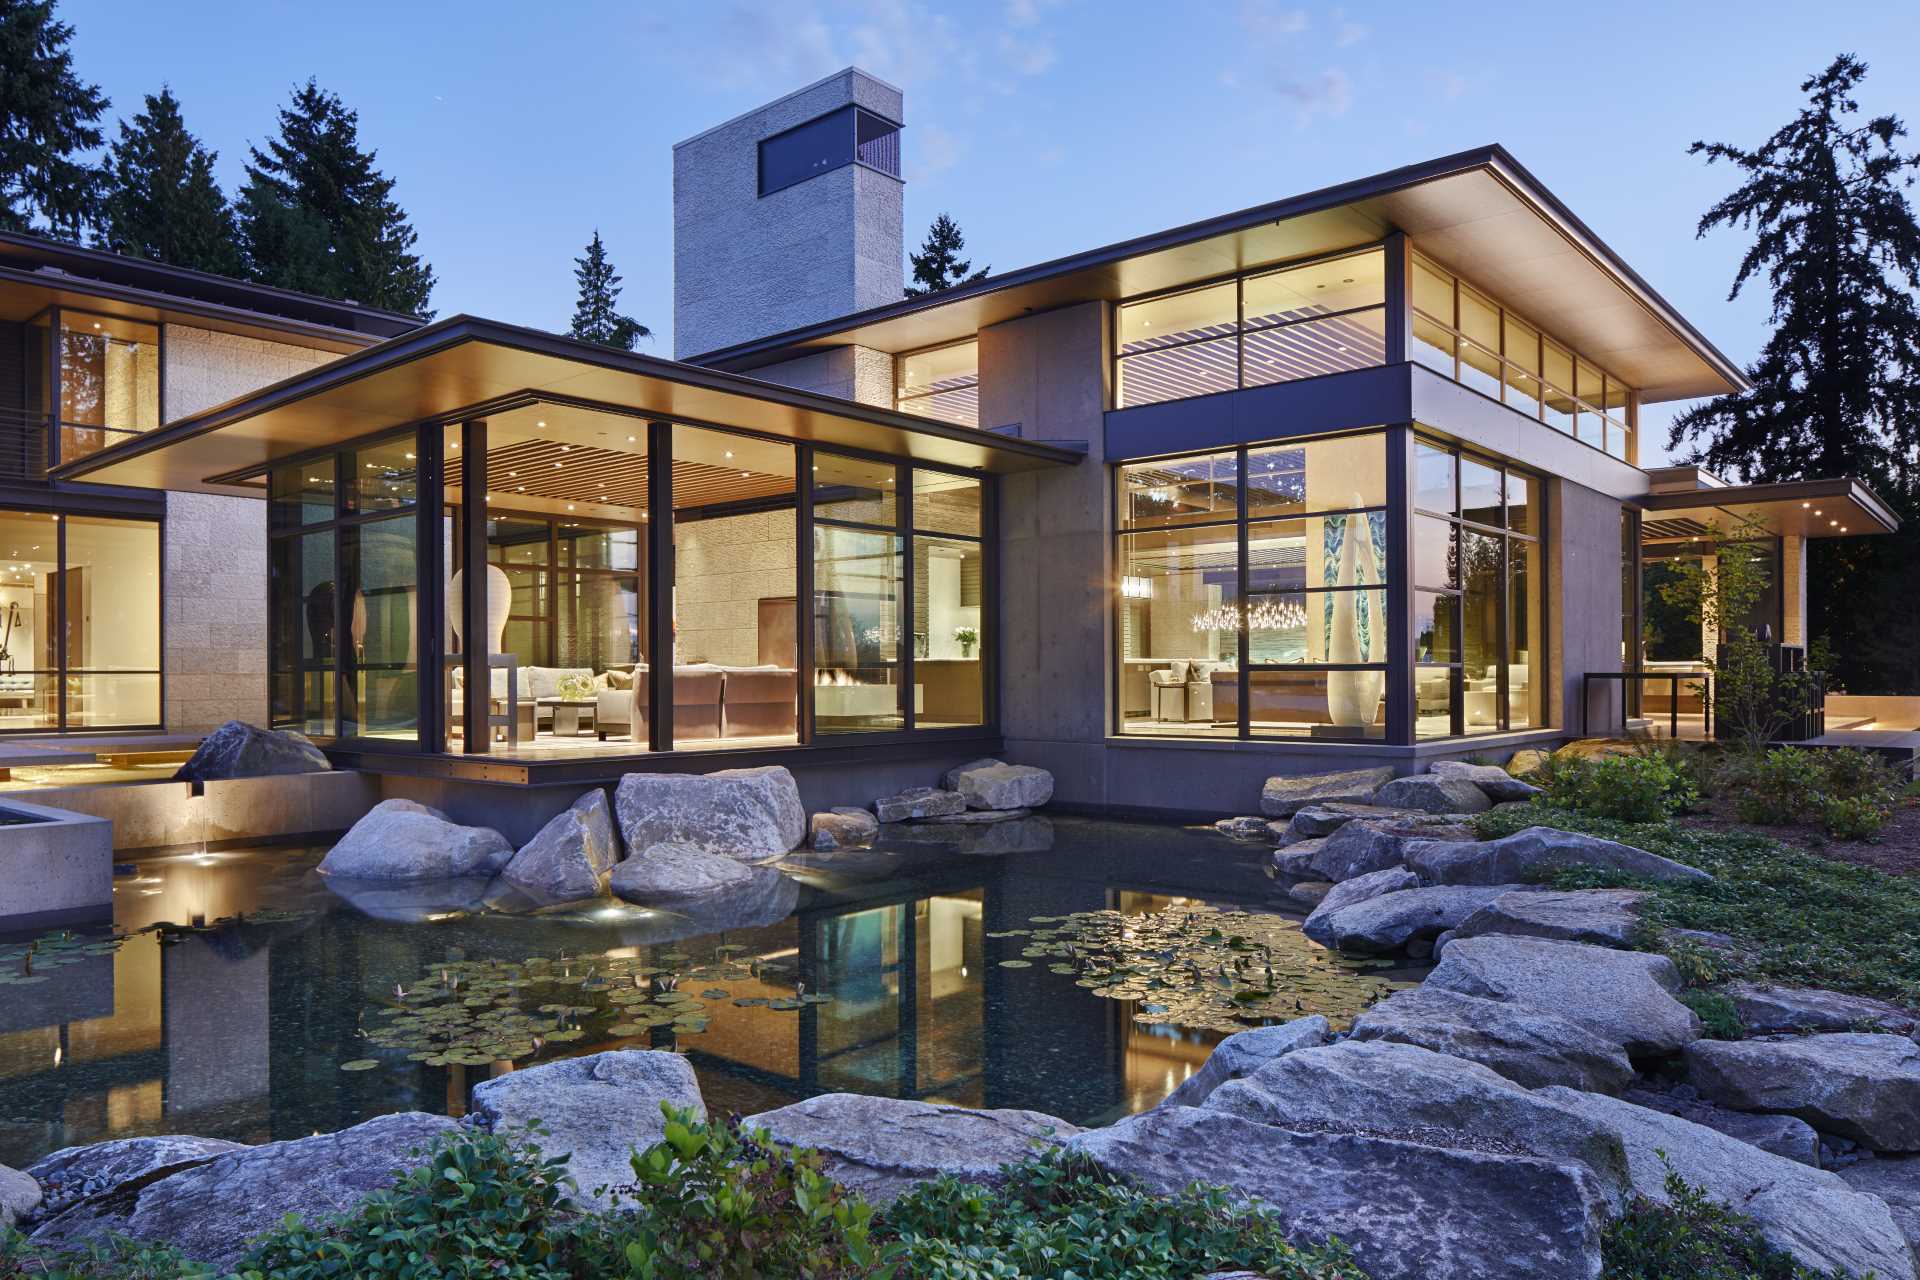 A modern house with a large water feature that resembles a native pond.